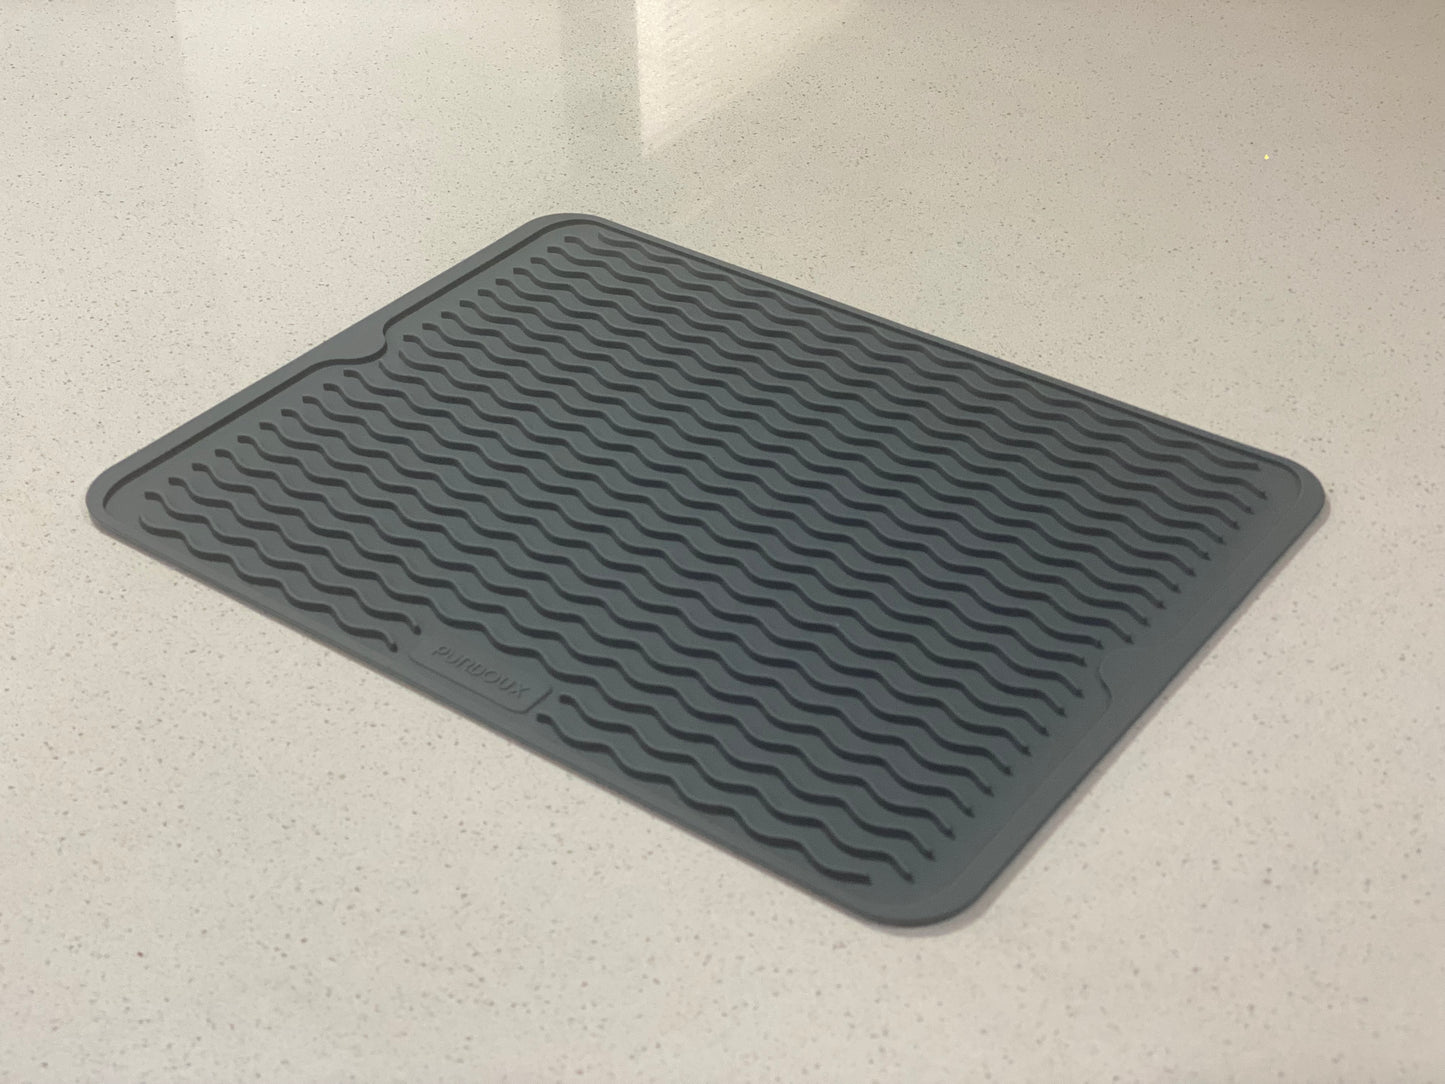 Purdoux CPAP Dust Cover and Protector Mat